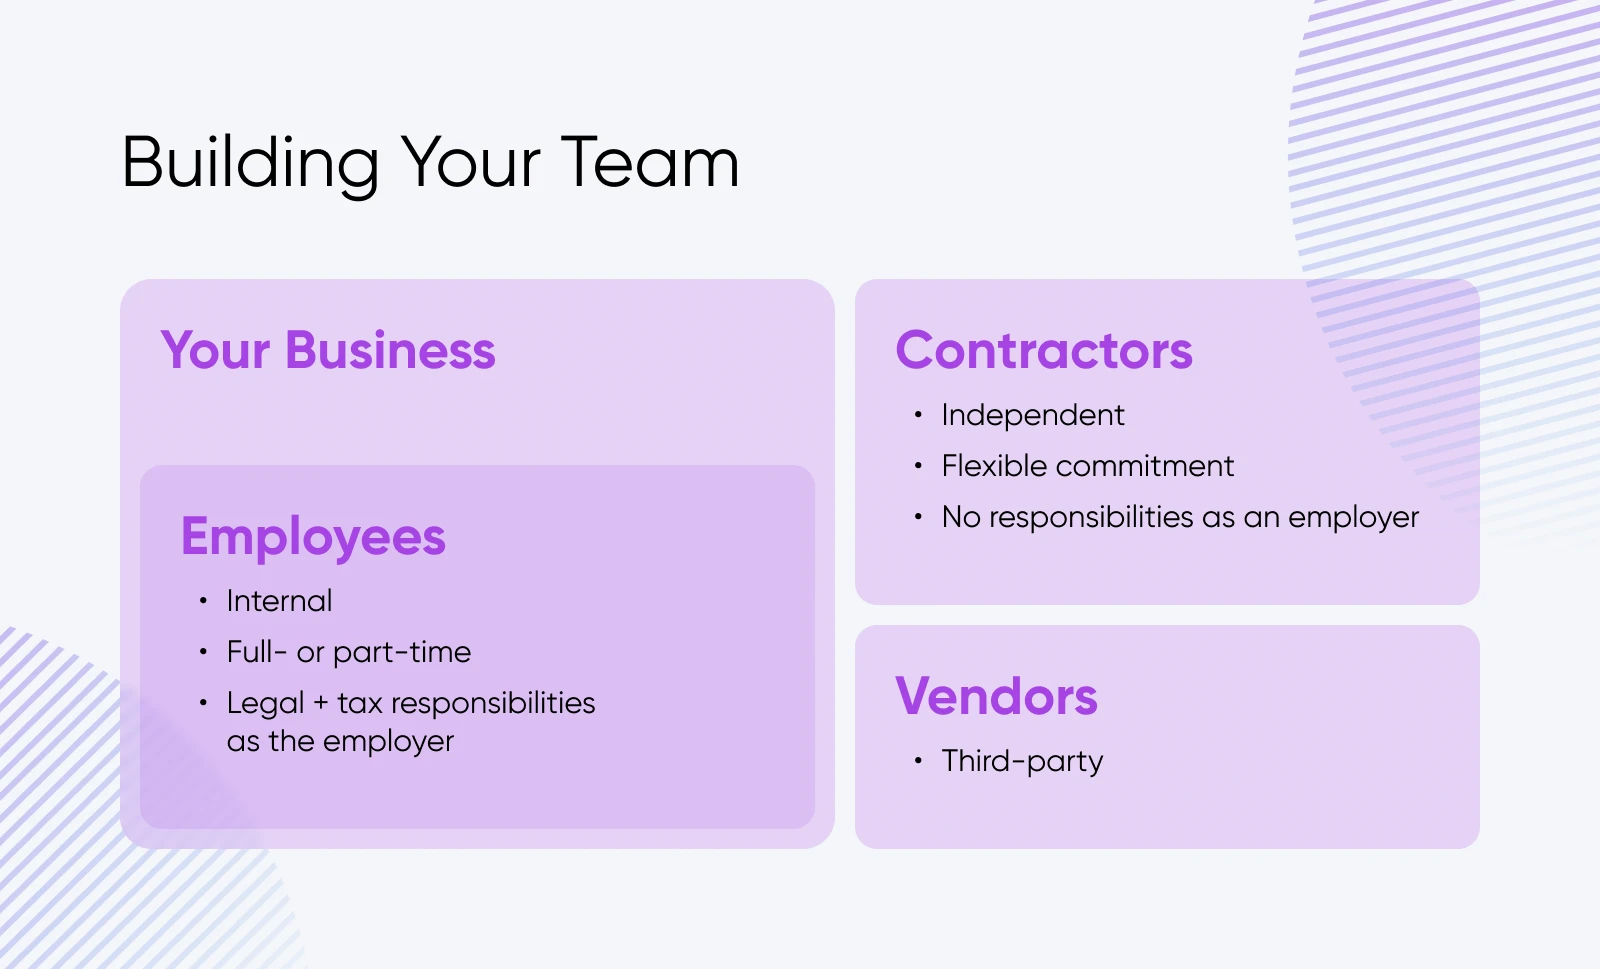 building your team shows employees within a business and separate contractors and separate vendors